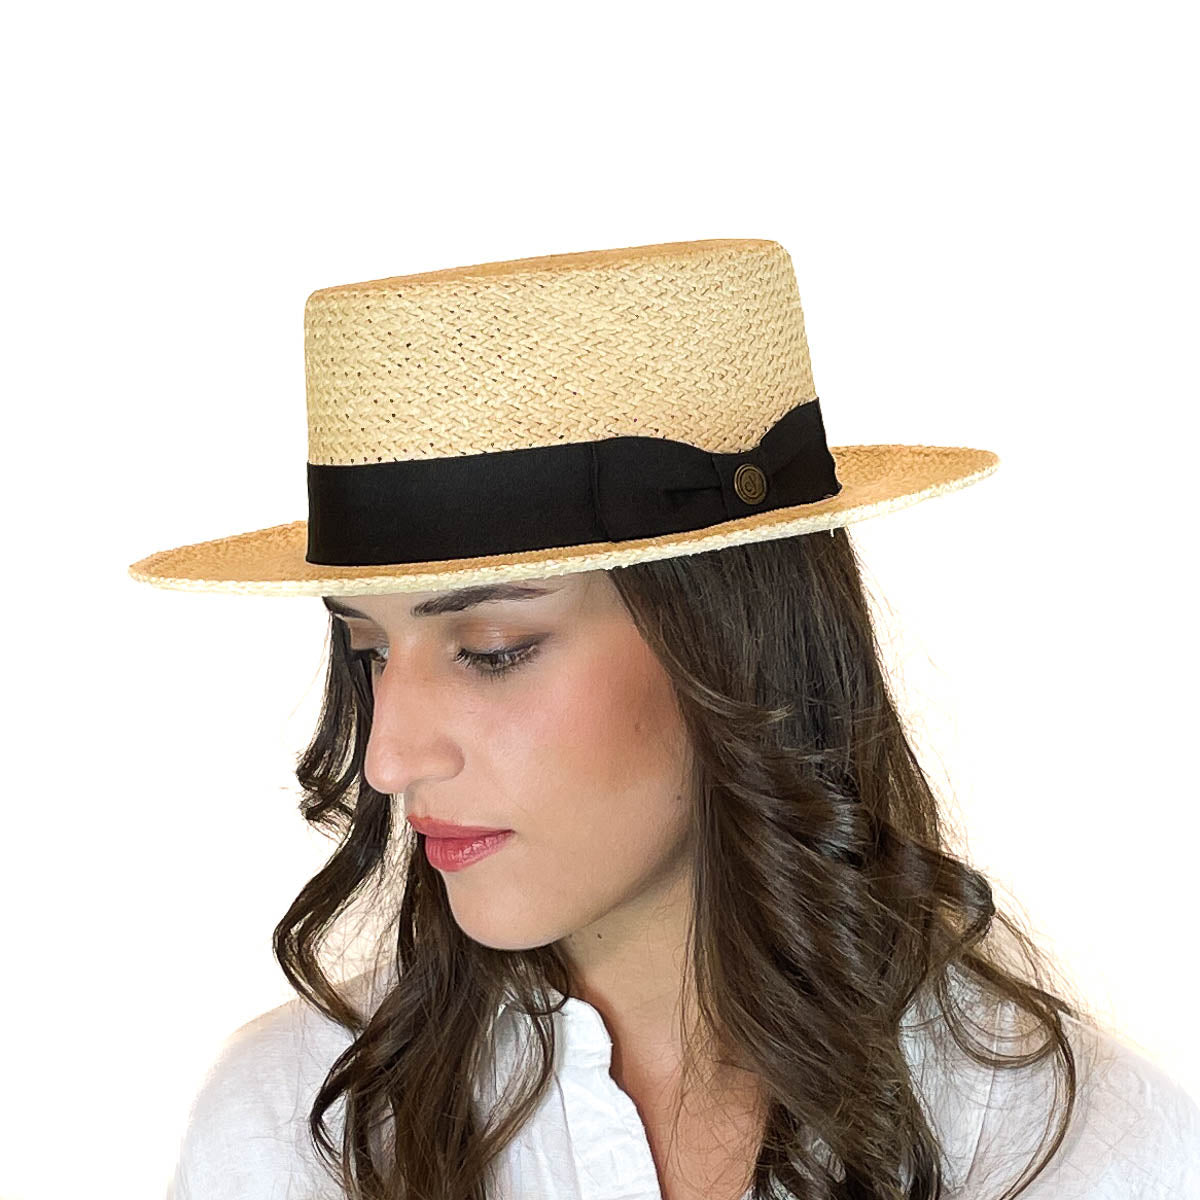 The Boater | Panama Hat